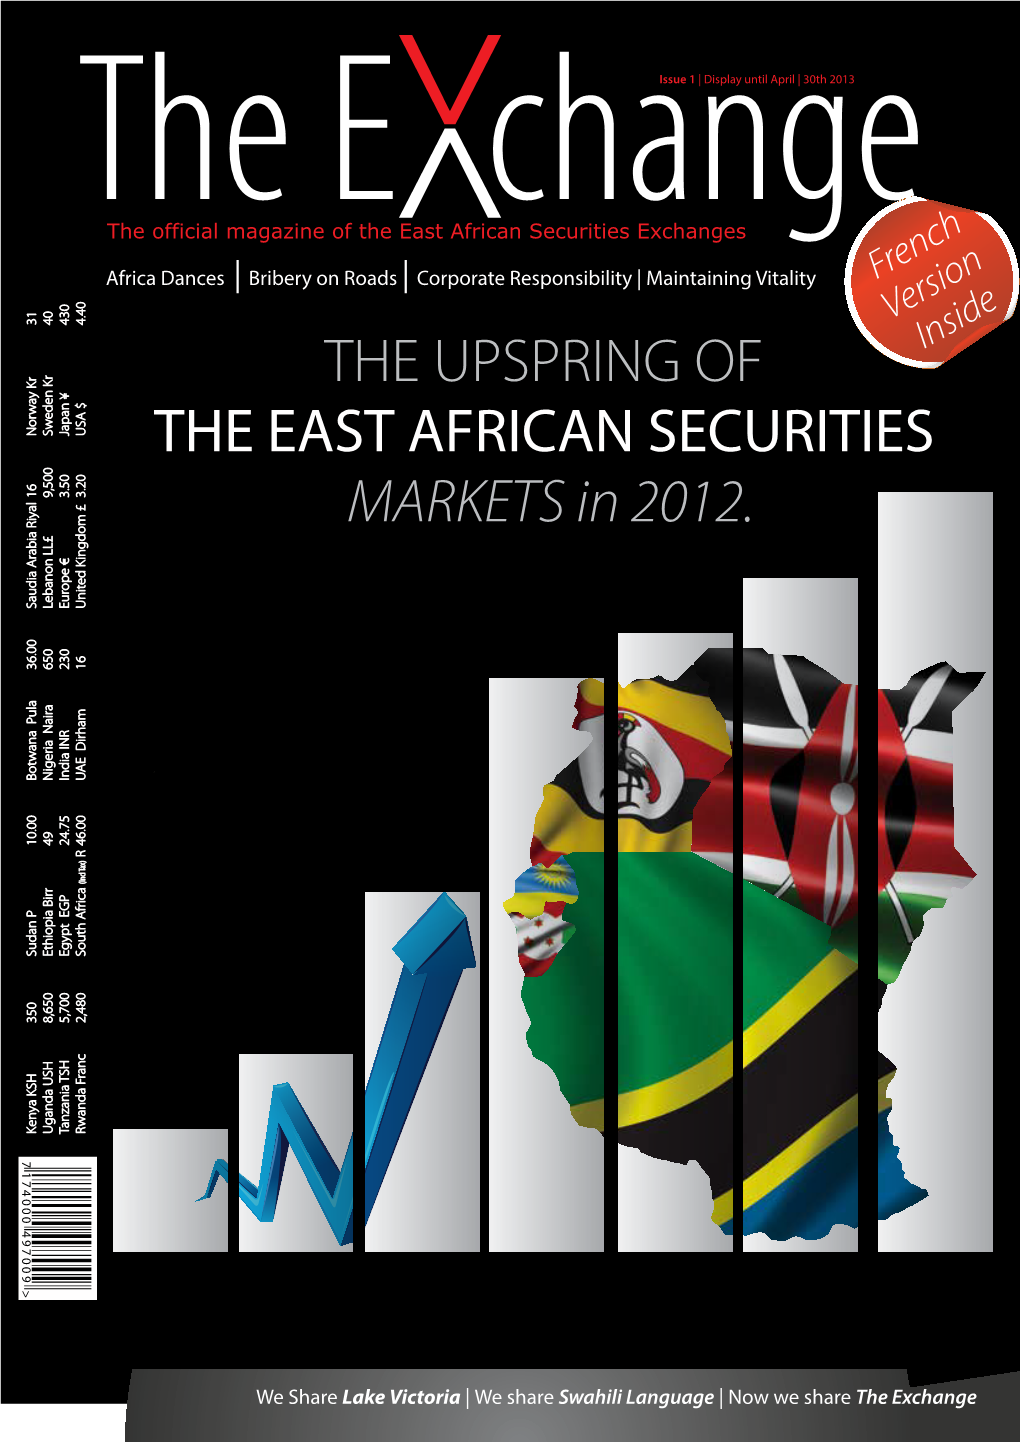 The Upspring of the East African Securities Markets